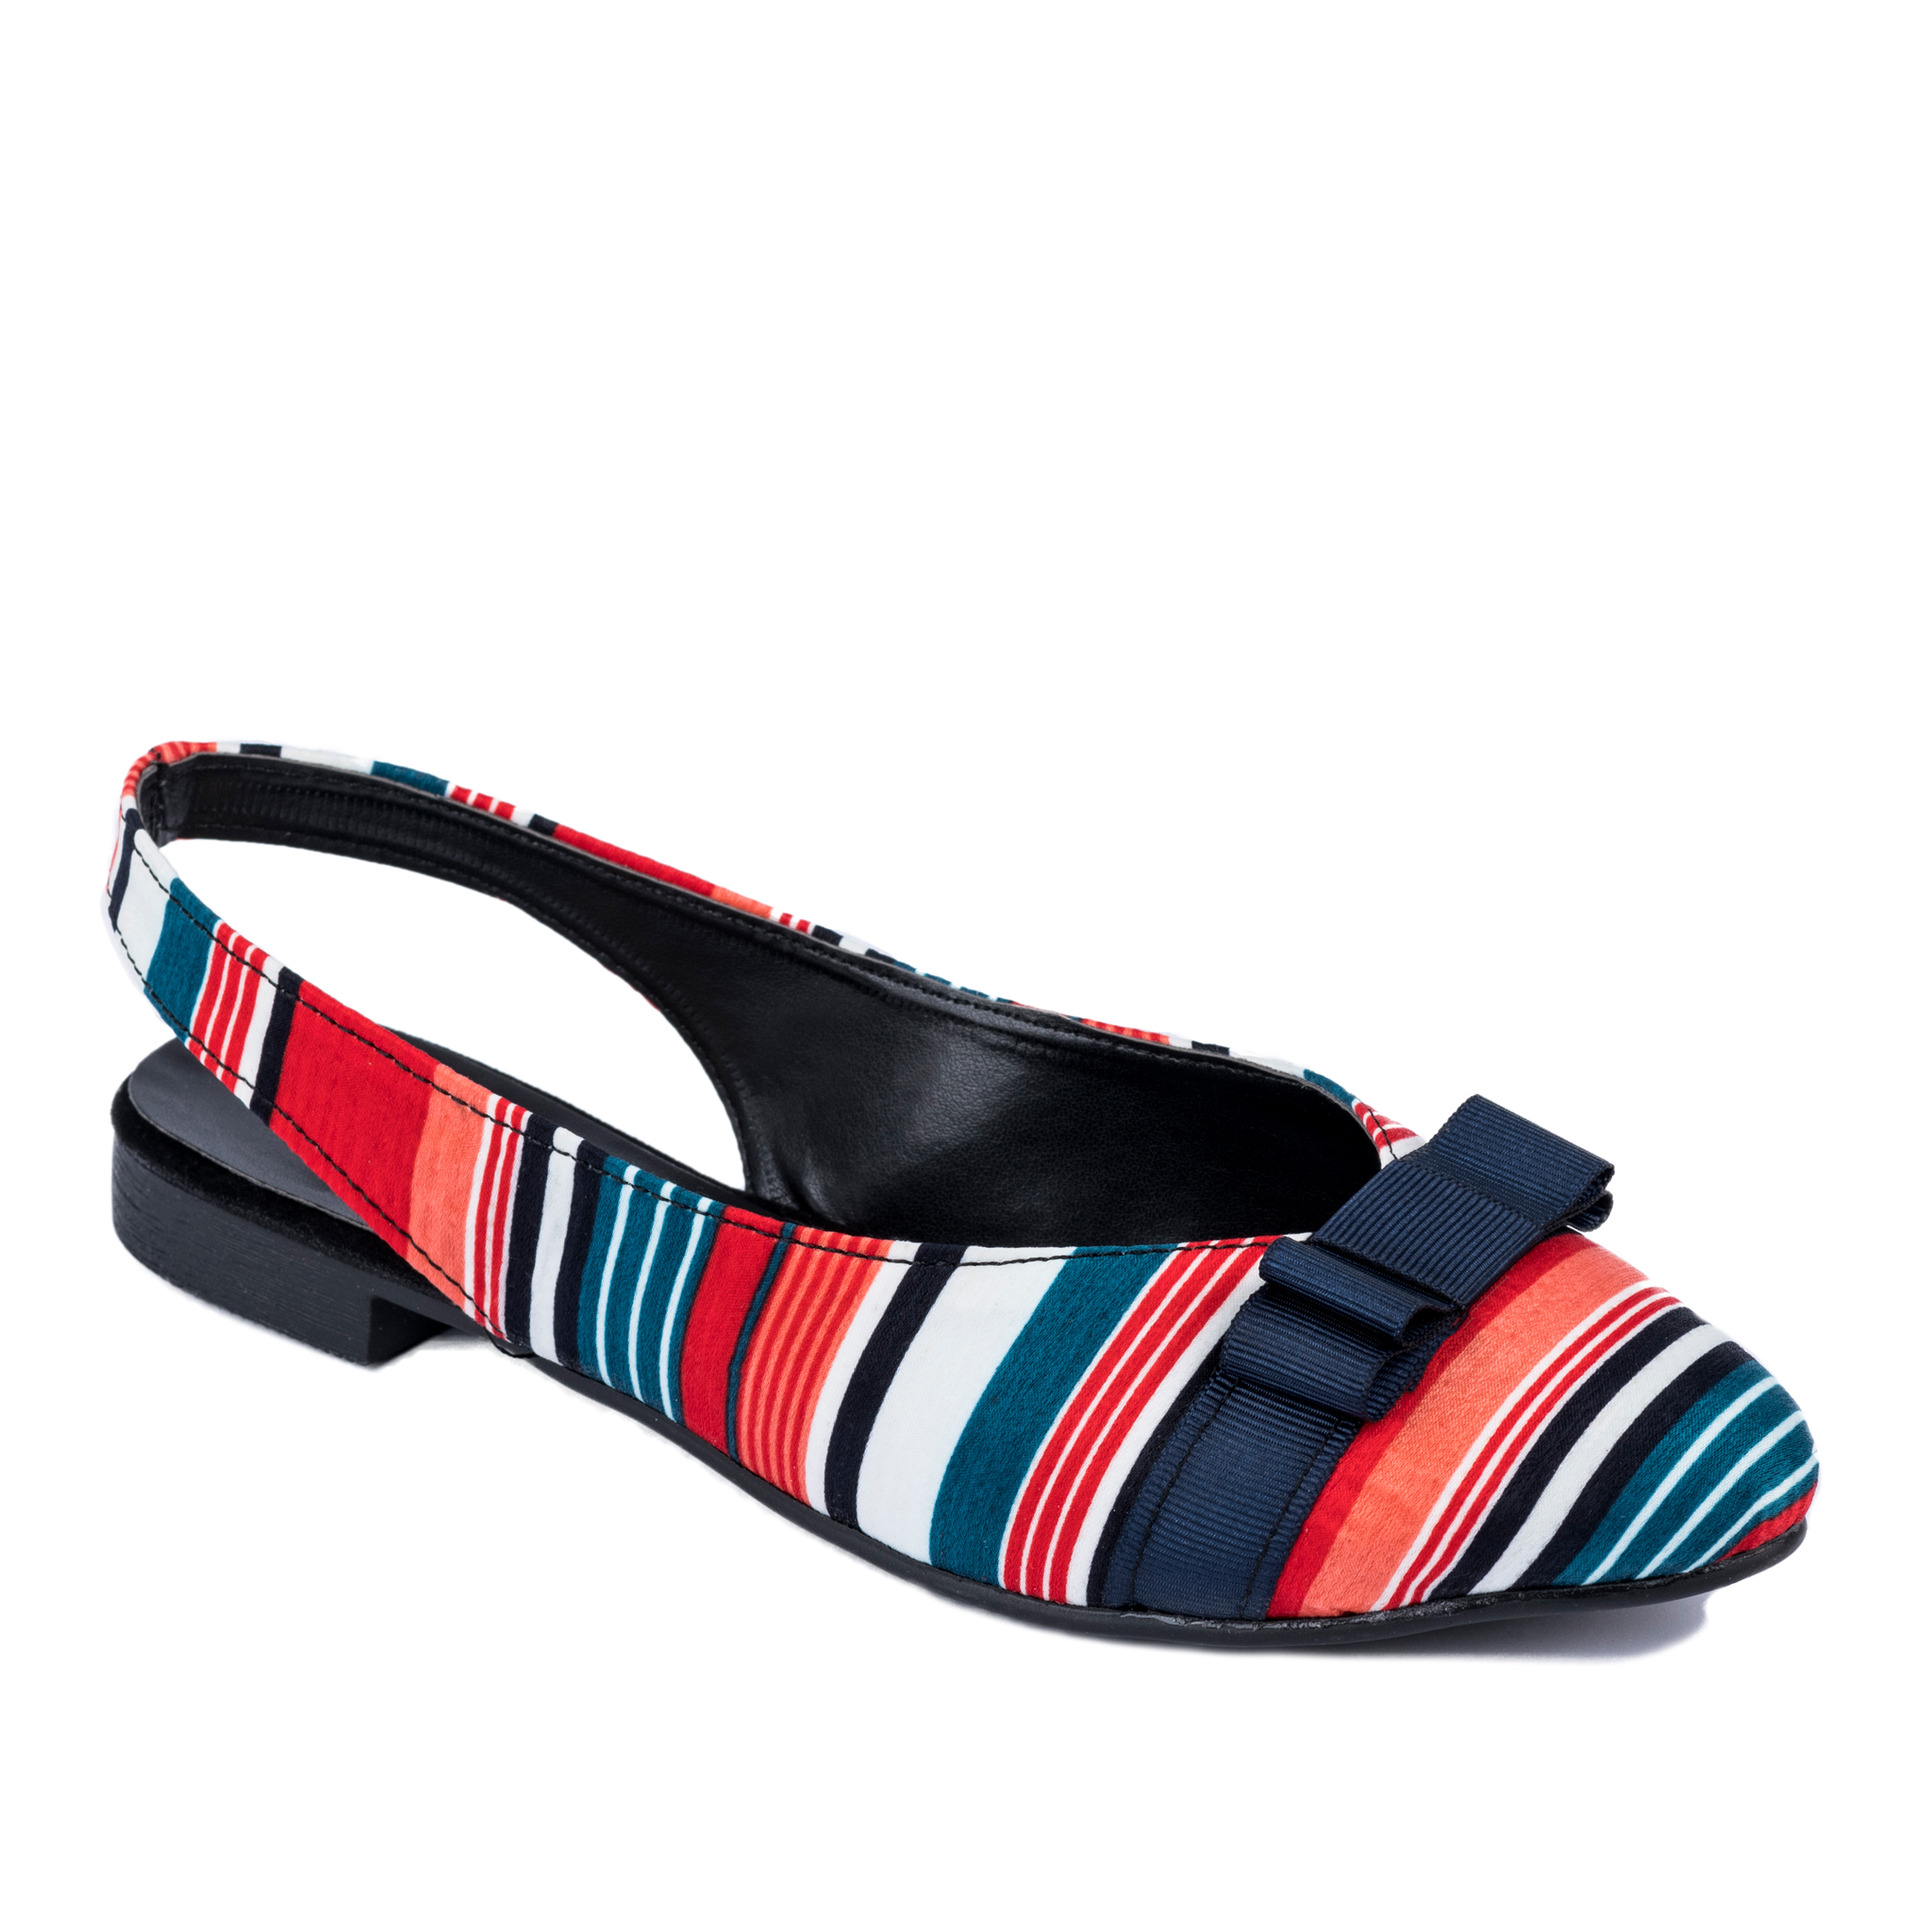 STRIPED FLATS WITH BOW - NAVY BLUE/RED